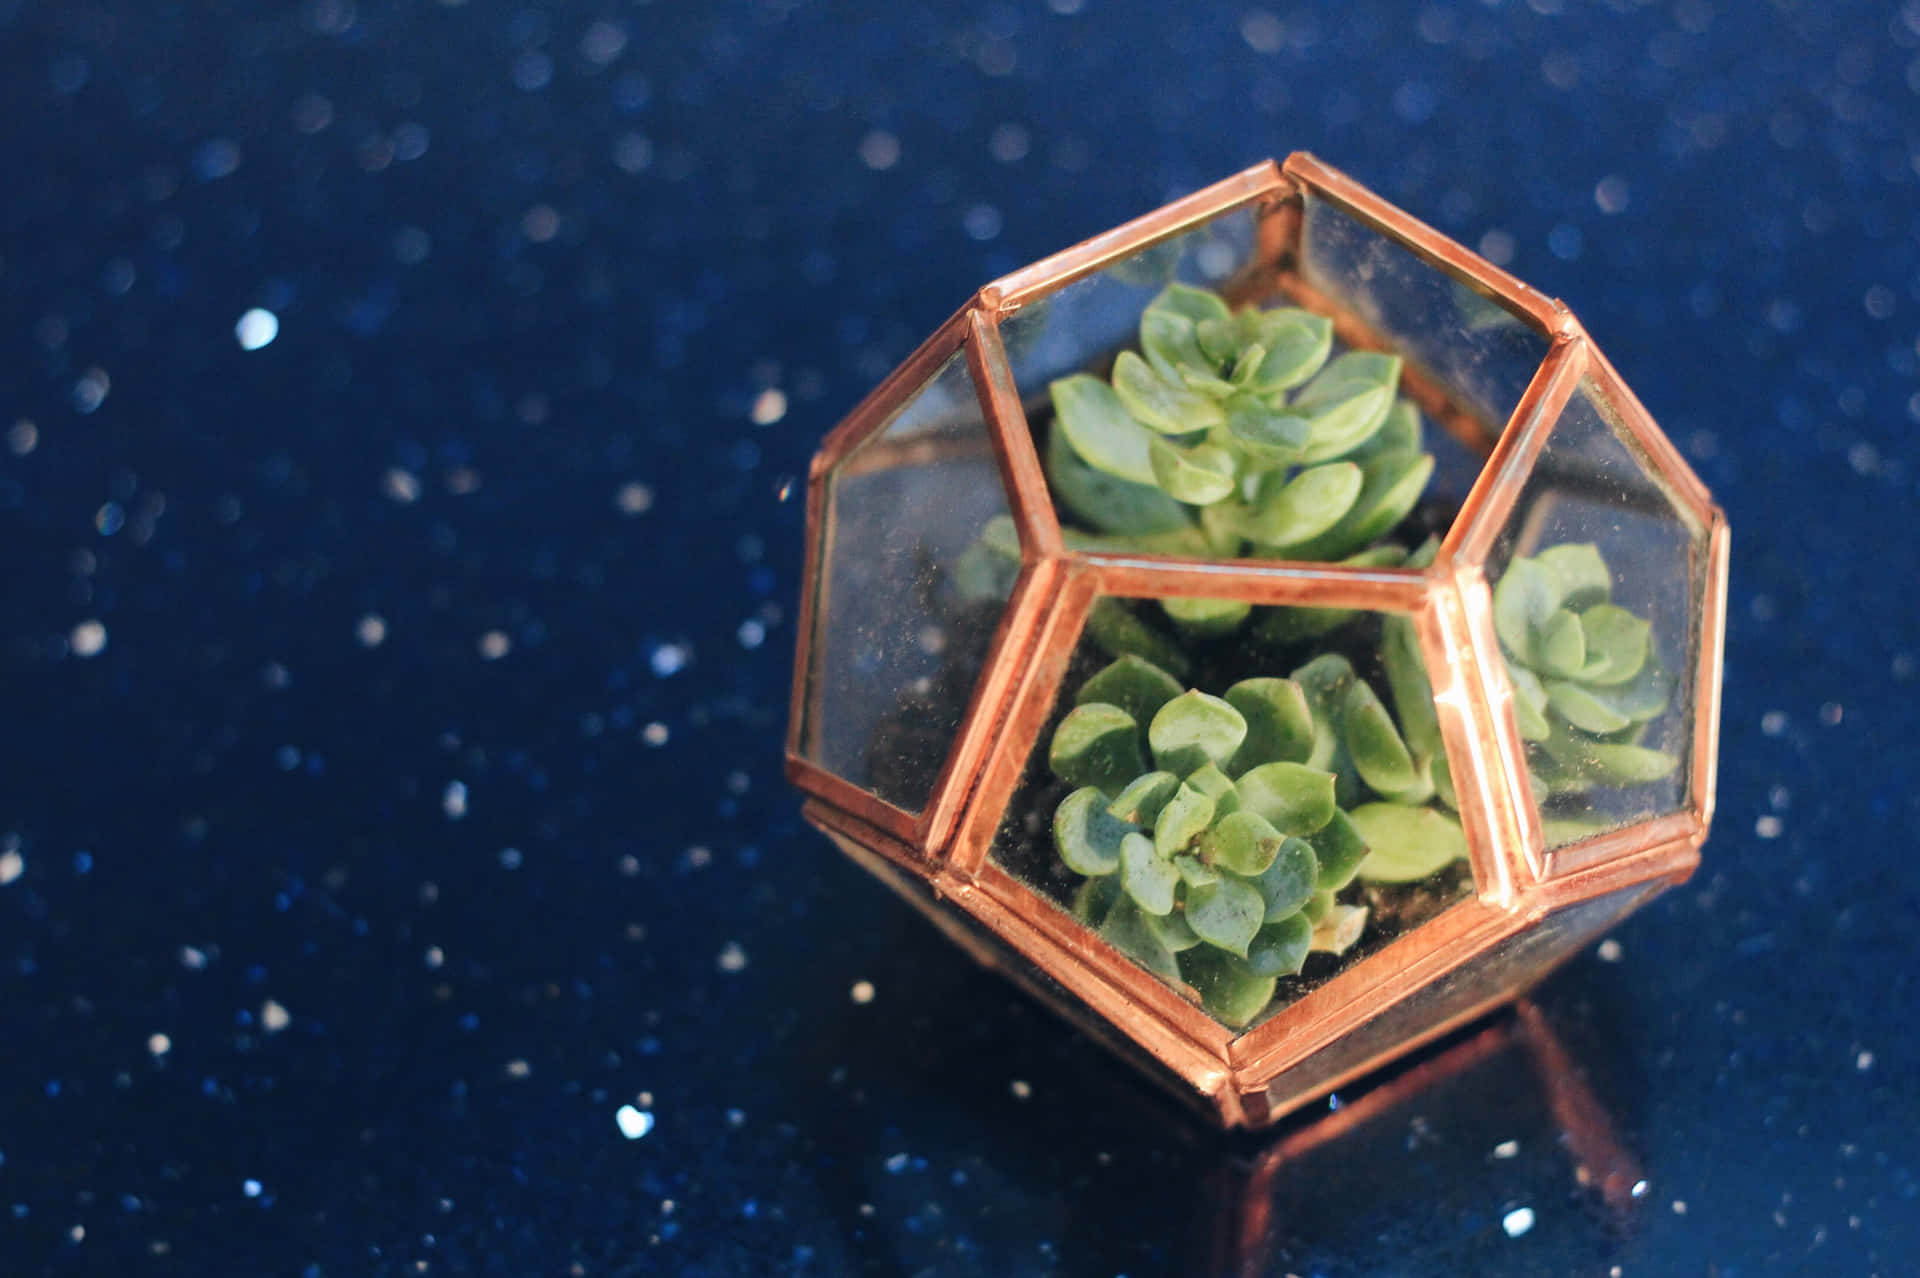 A Copper Hexagonal Planter With Succulents On A Blue Background